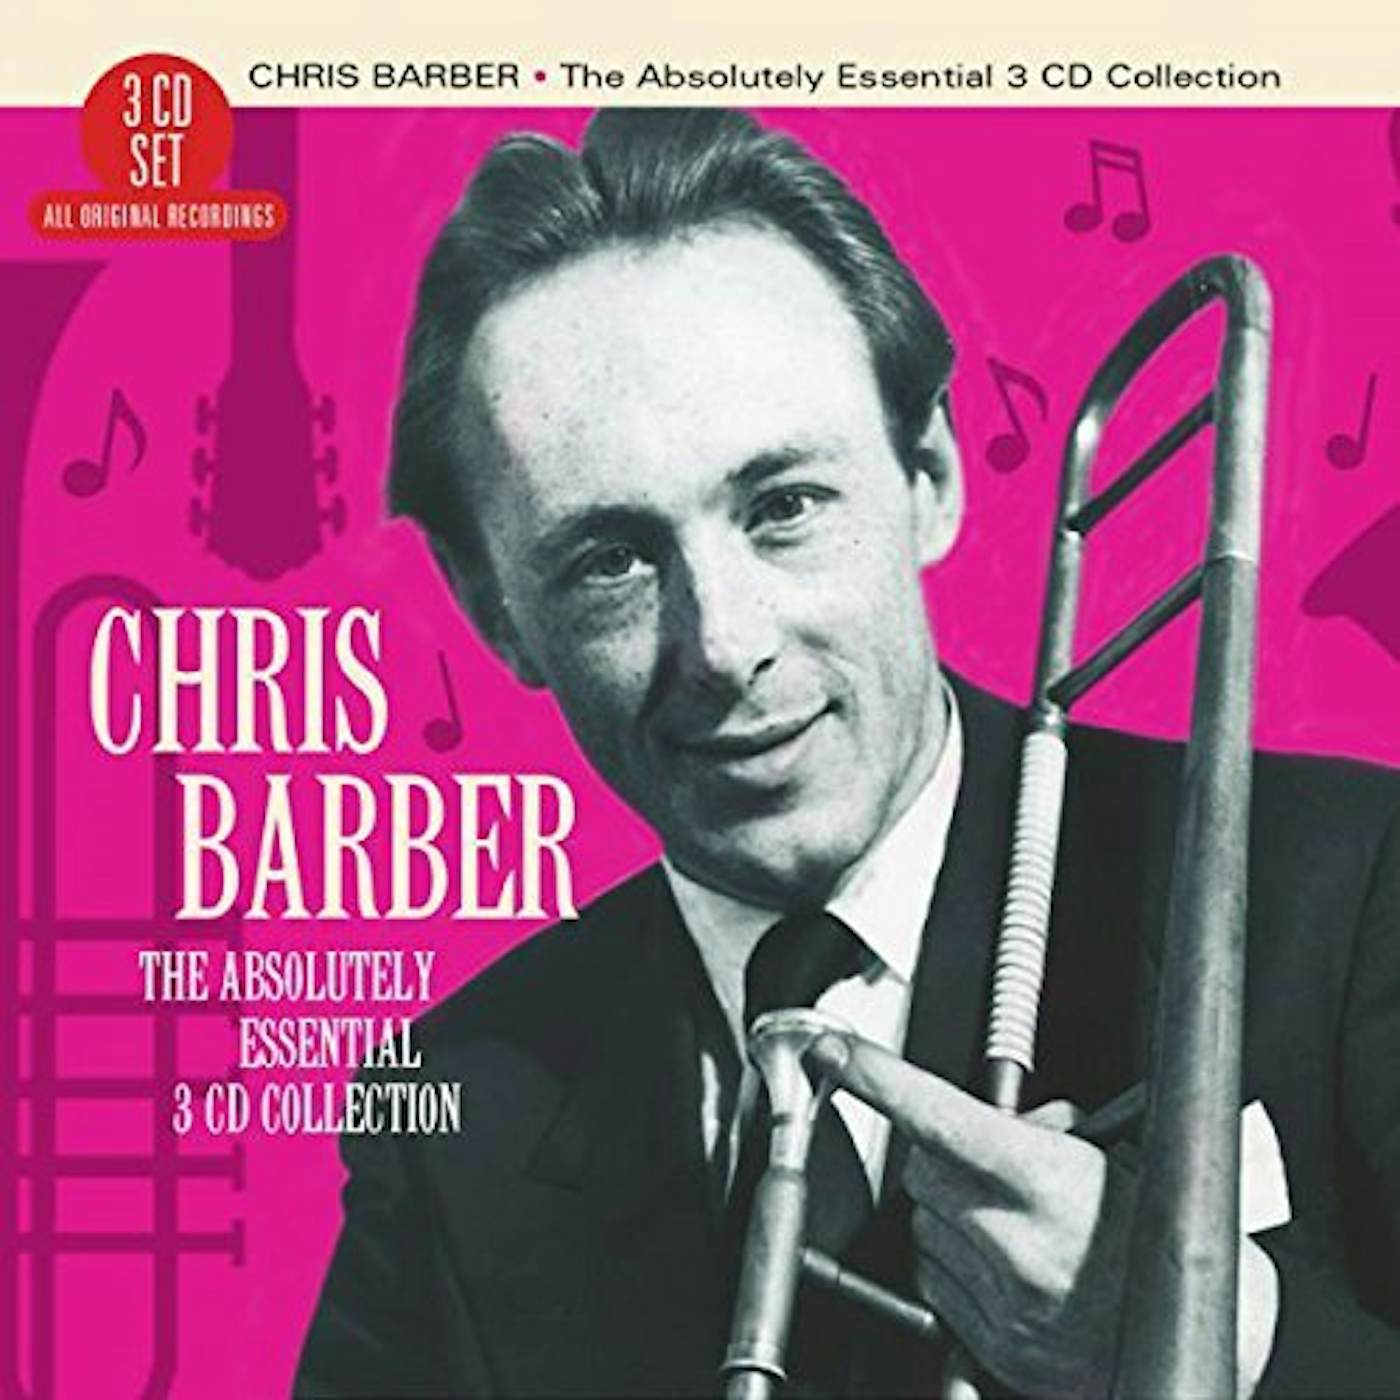 Chris Barber ABSOLUTELY ESSENTIAL 3CD COLLECTION CD